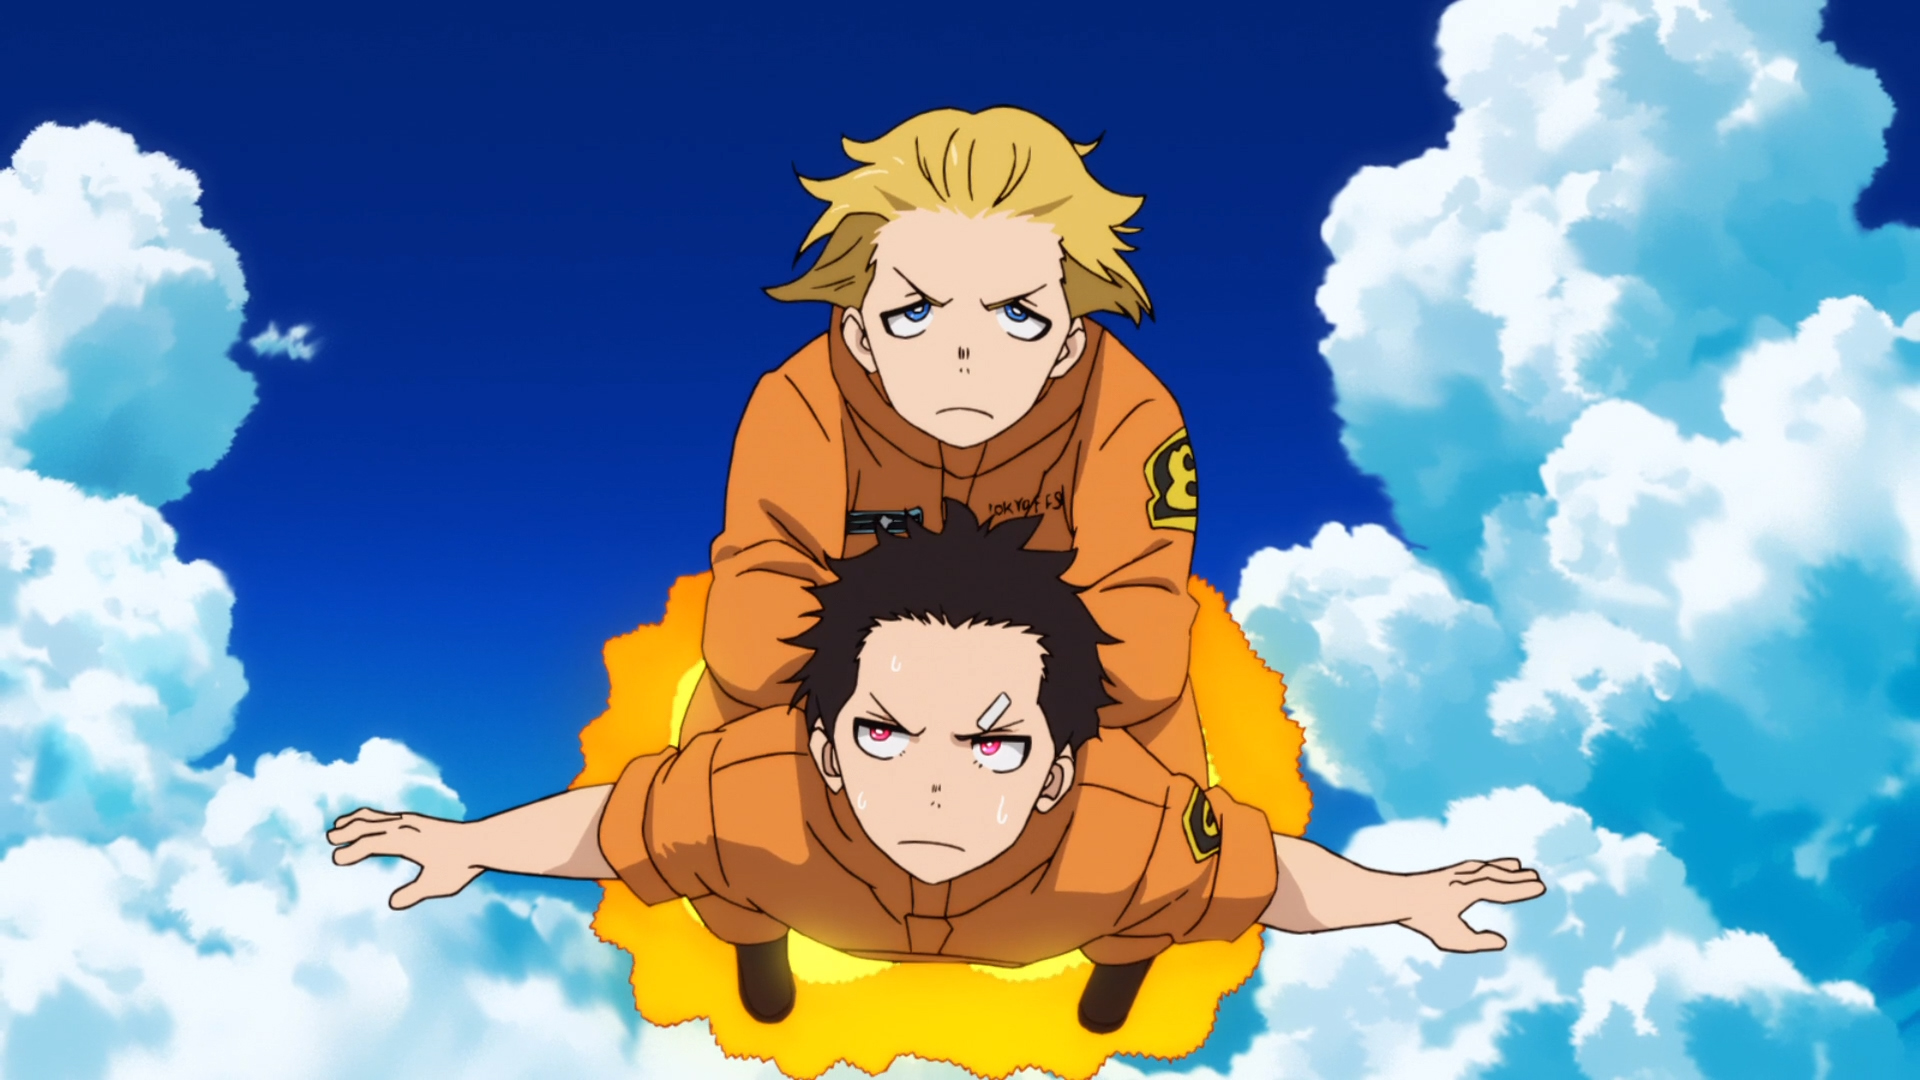 Fire Force Part 1 Boxset (Anime) Review - STG Play